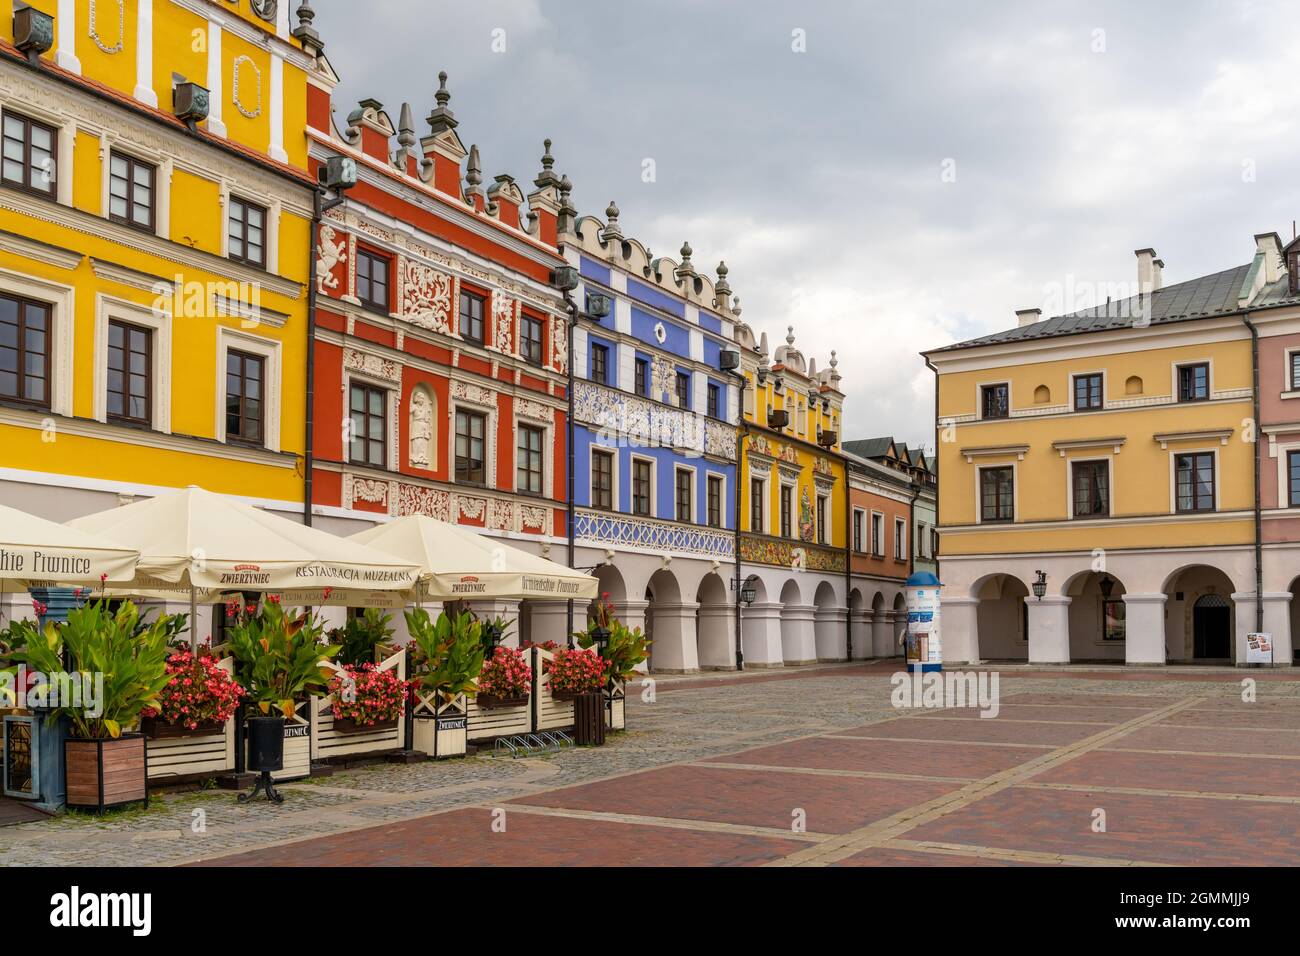 Zamosc, Poland - 13 September, 2021: colorful Renaissance buildings and street restaurant on the Great Market Square in the old city center of Zamosc Stock Photo